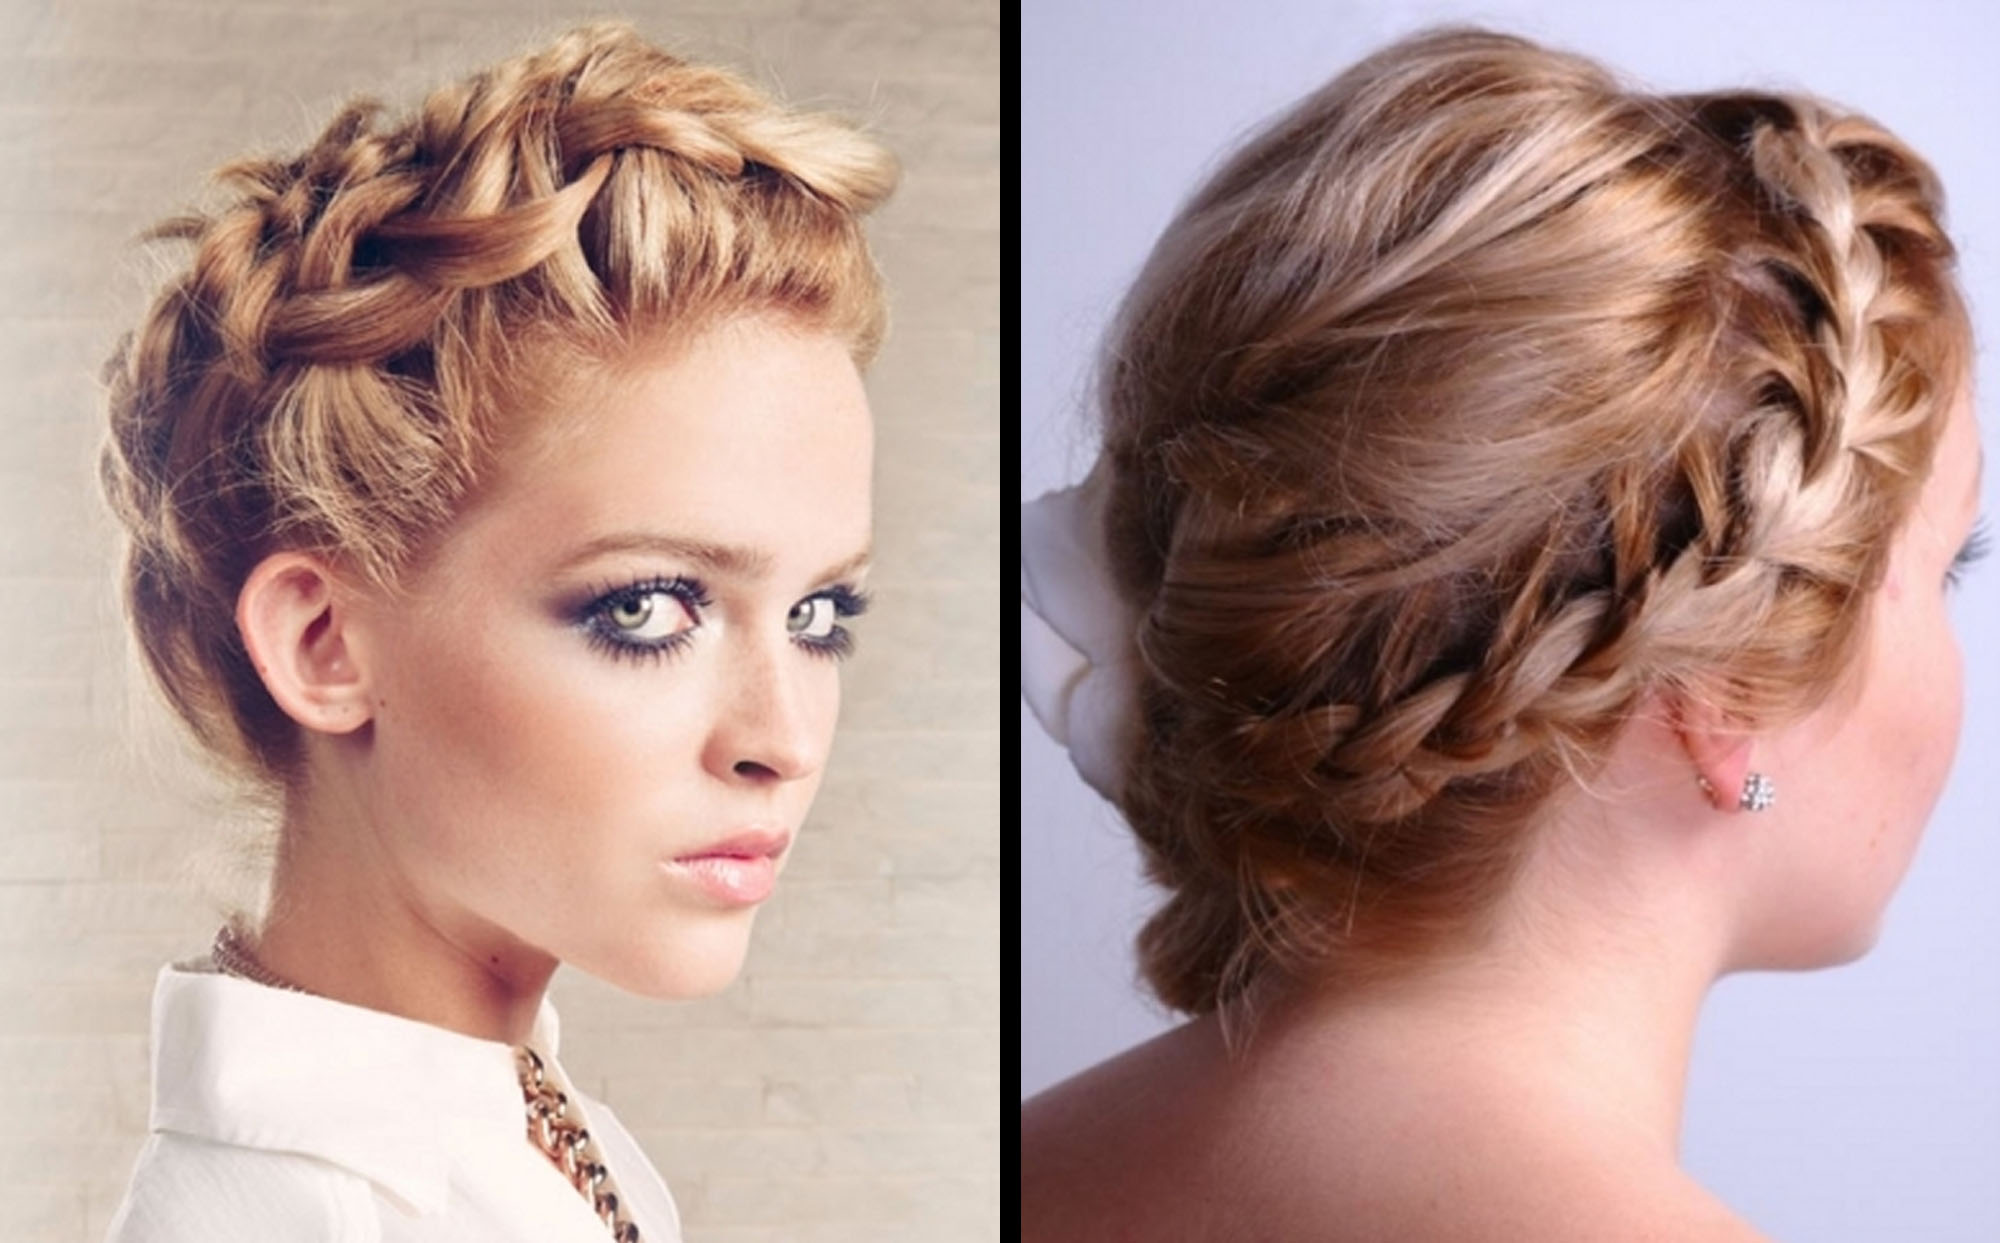 Prom hairstyles for short hair prom-hairstyles-for-short-hair-16-7